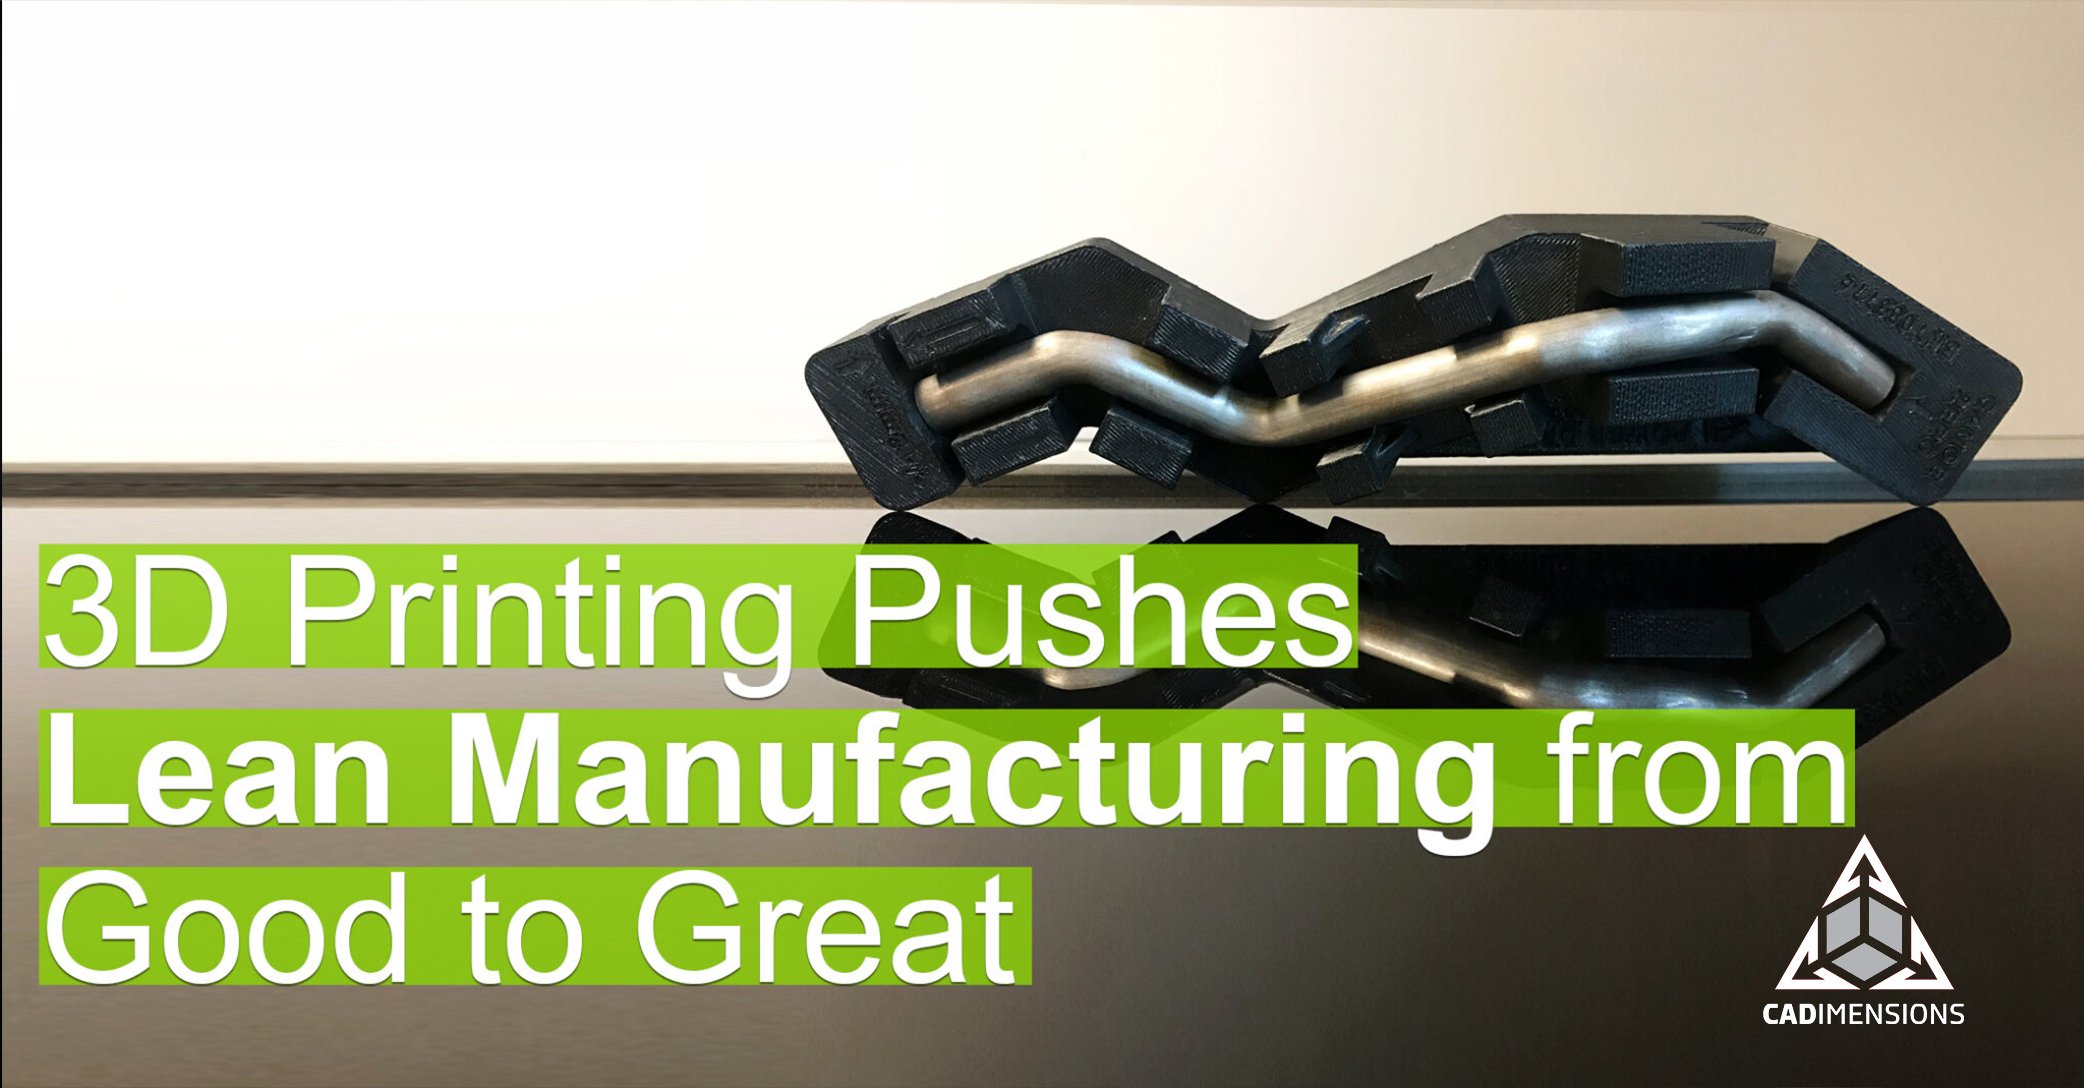 3D Printing Pushes Lean Manufacturing from Good to Great